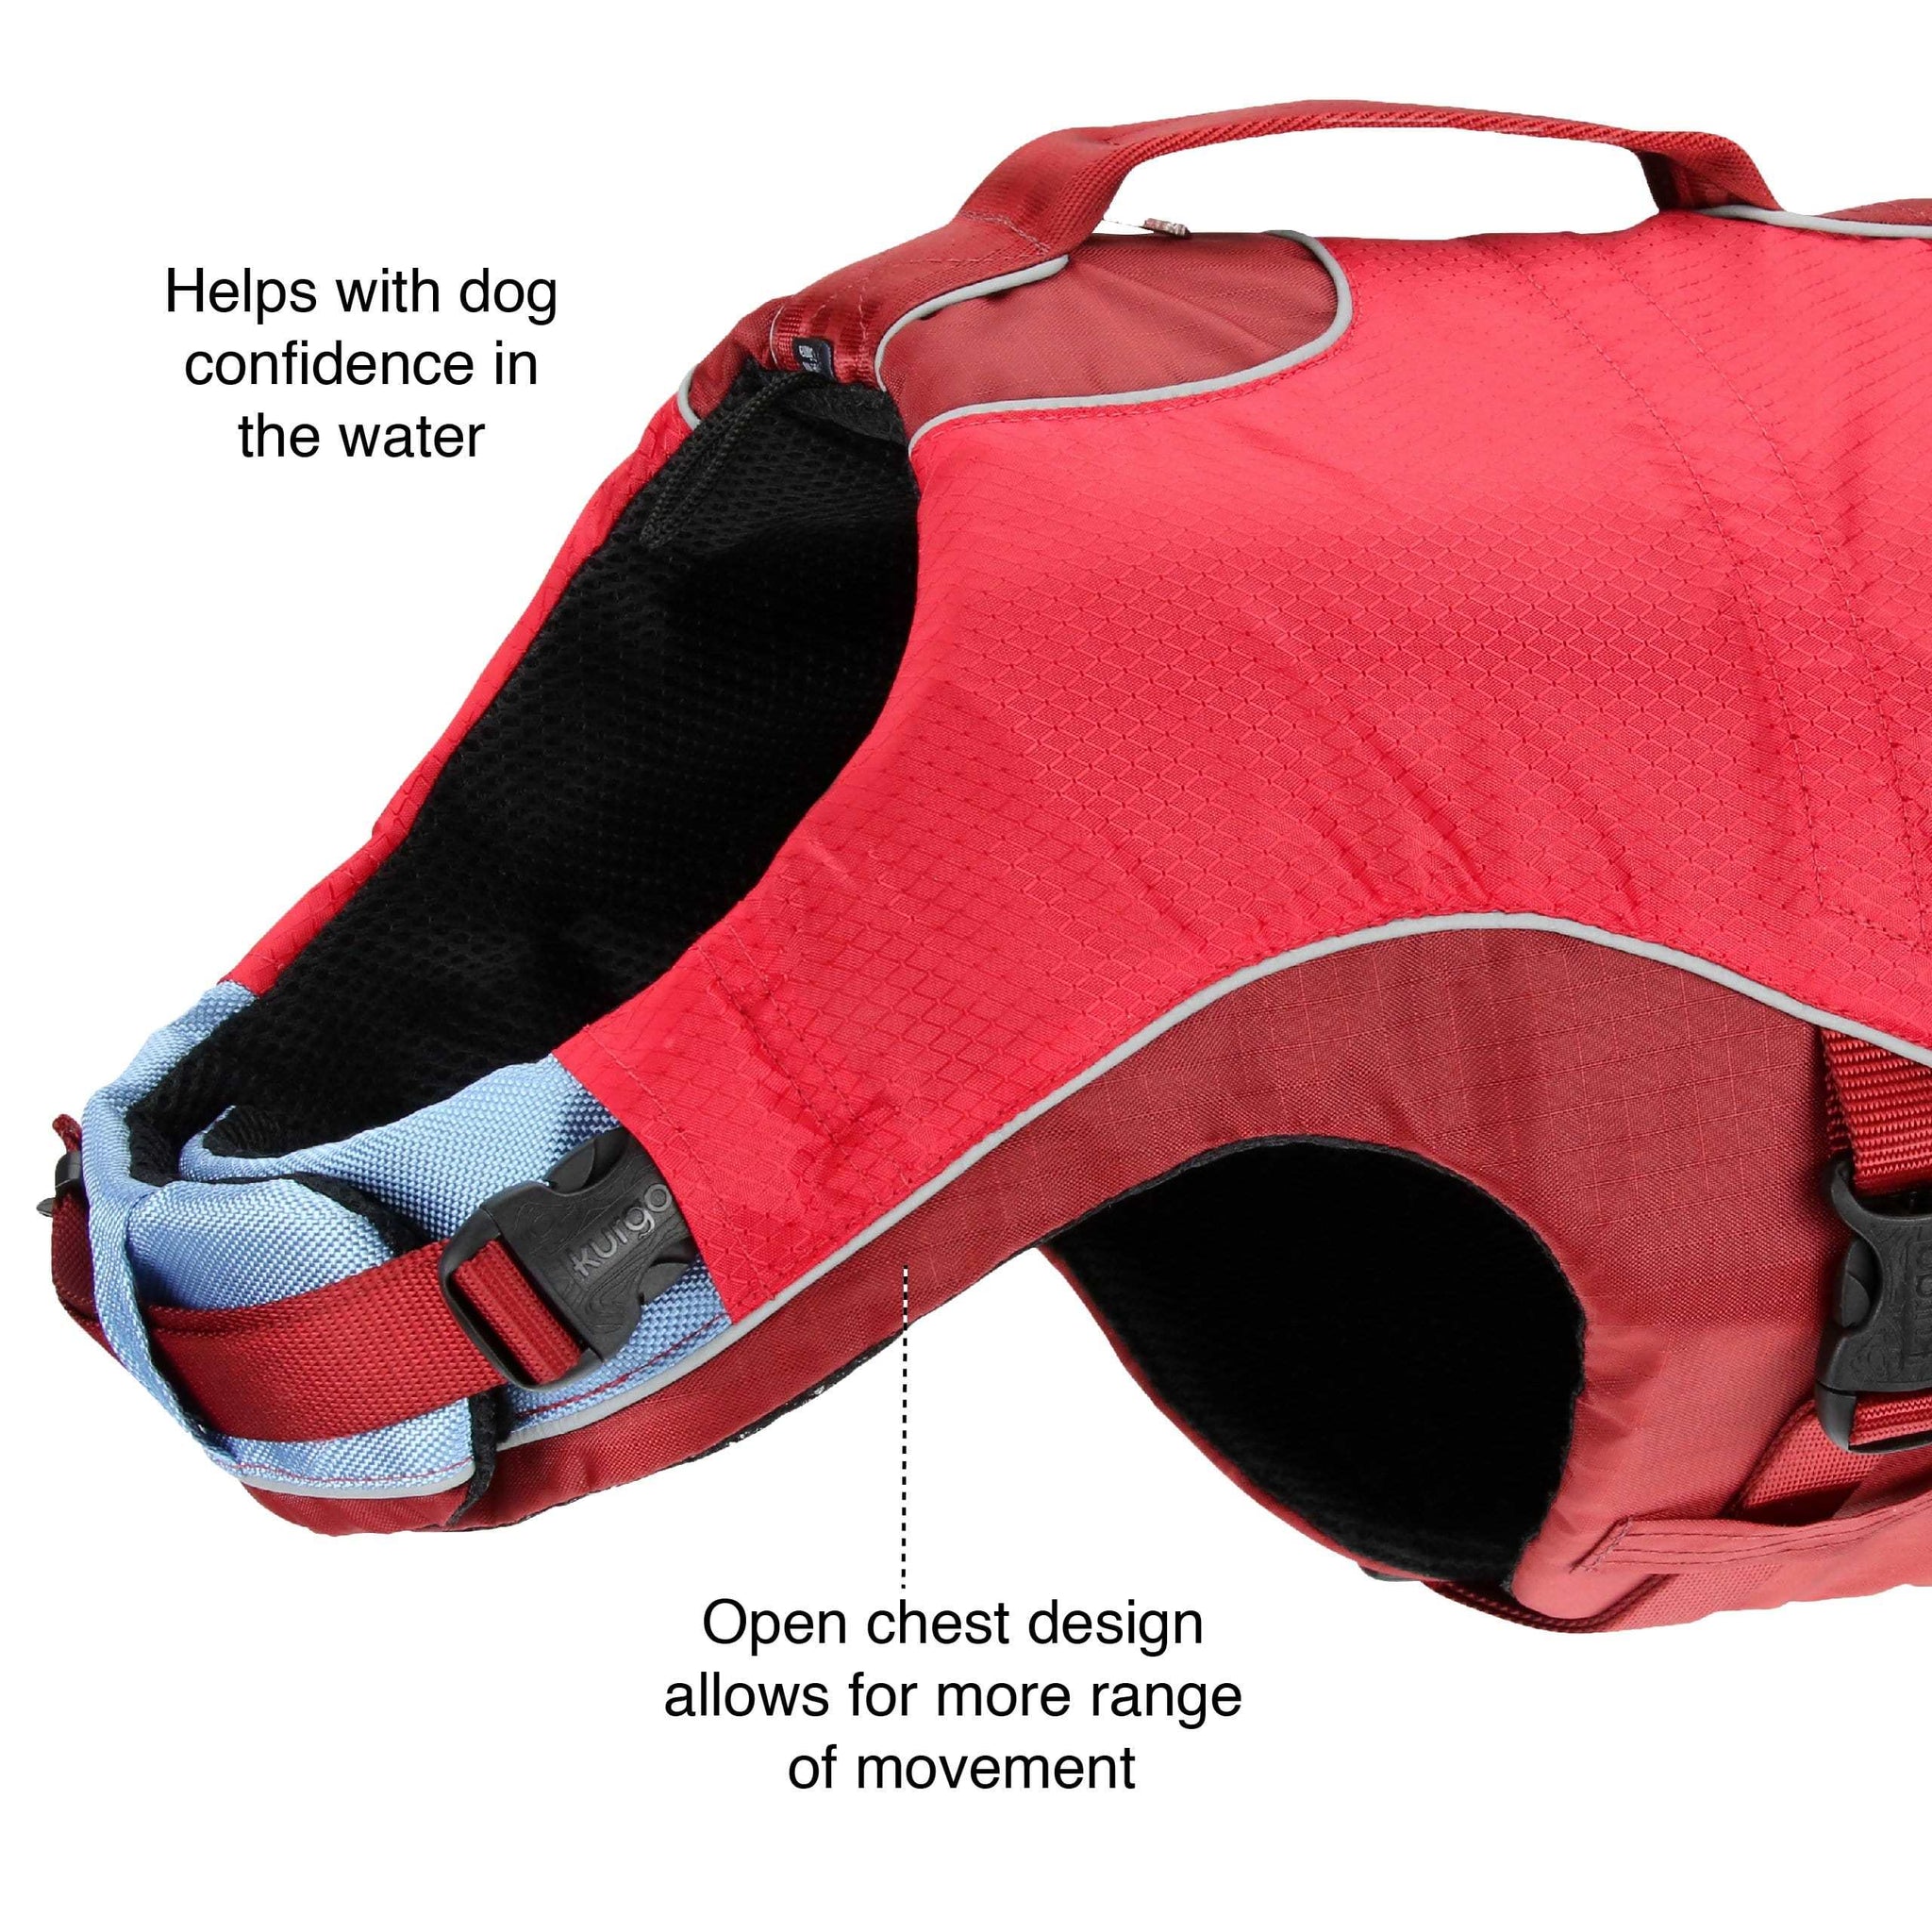 Surf n Turf Life Jacket showing the open chest design